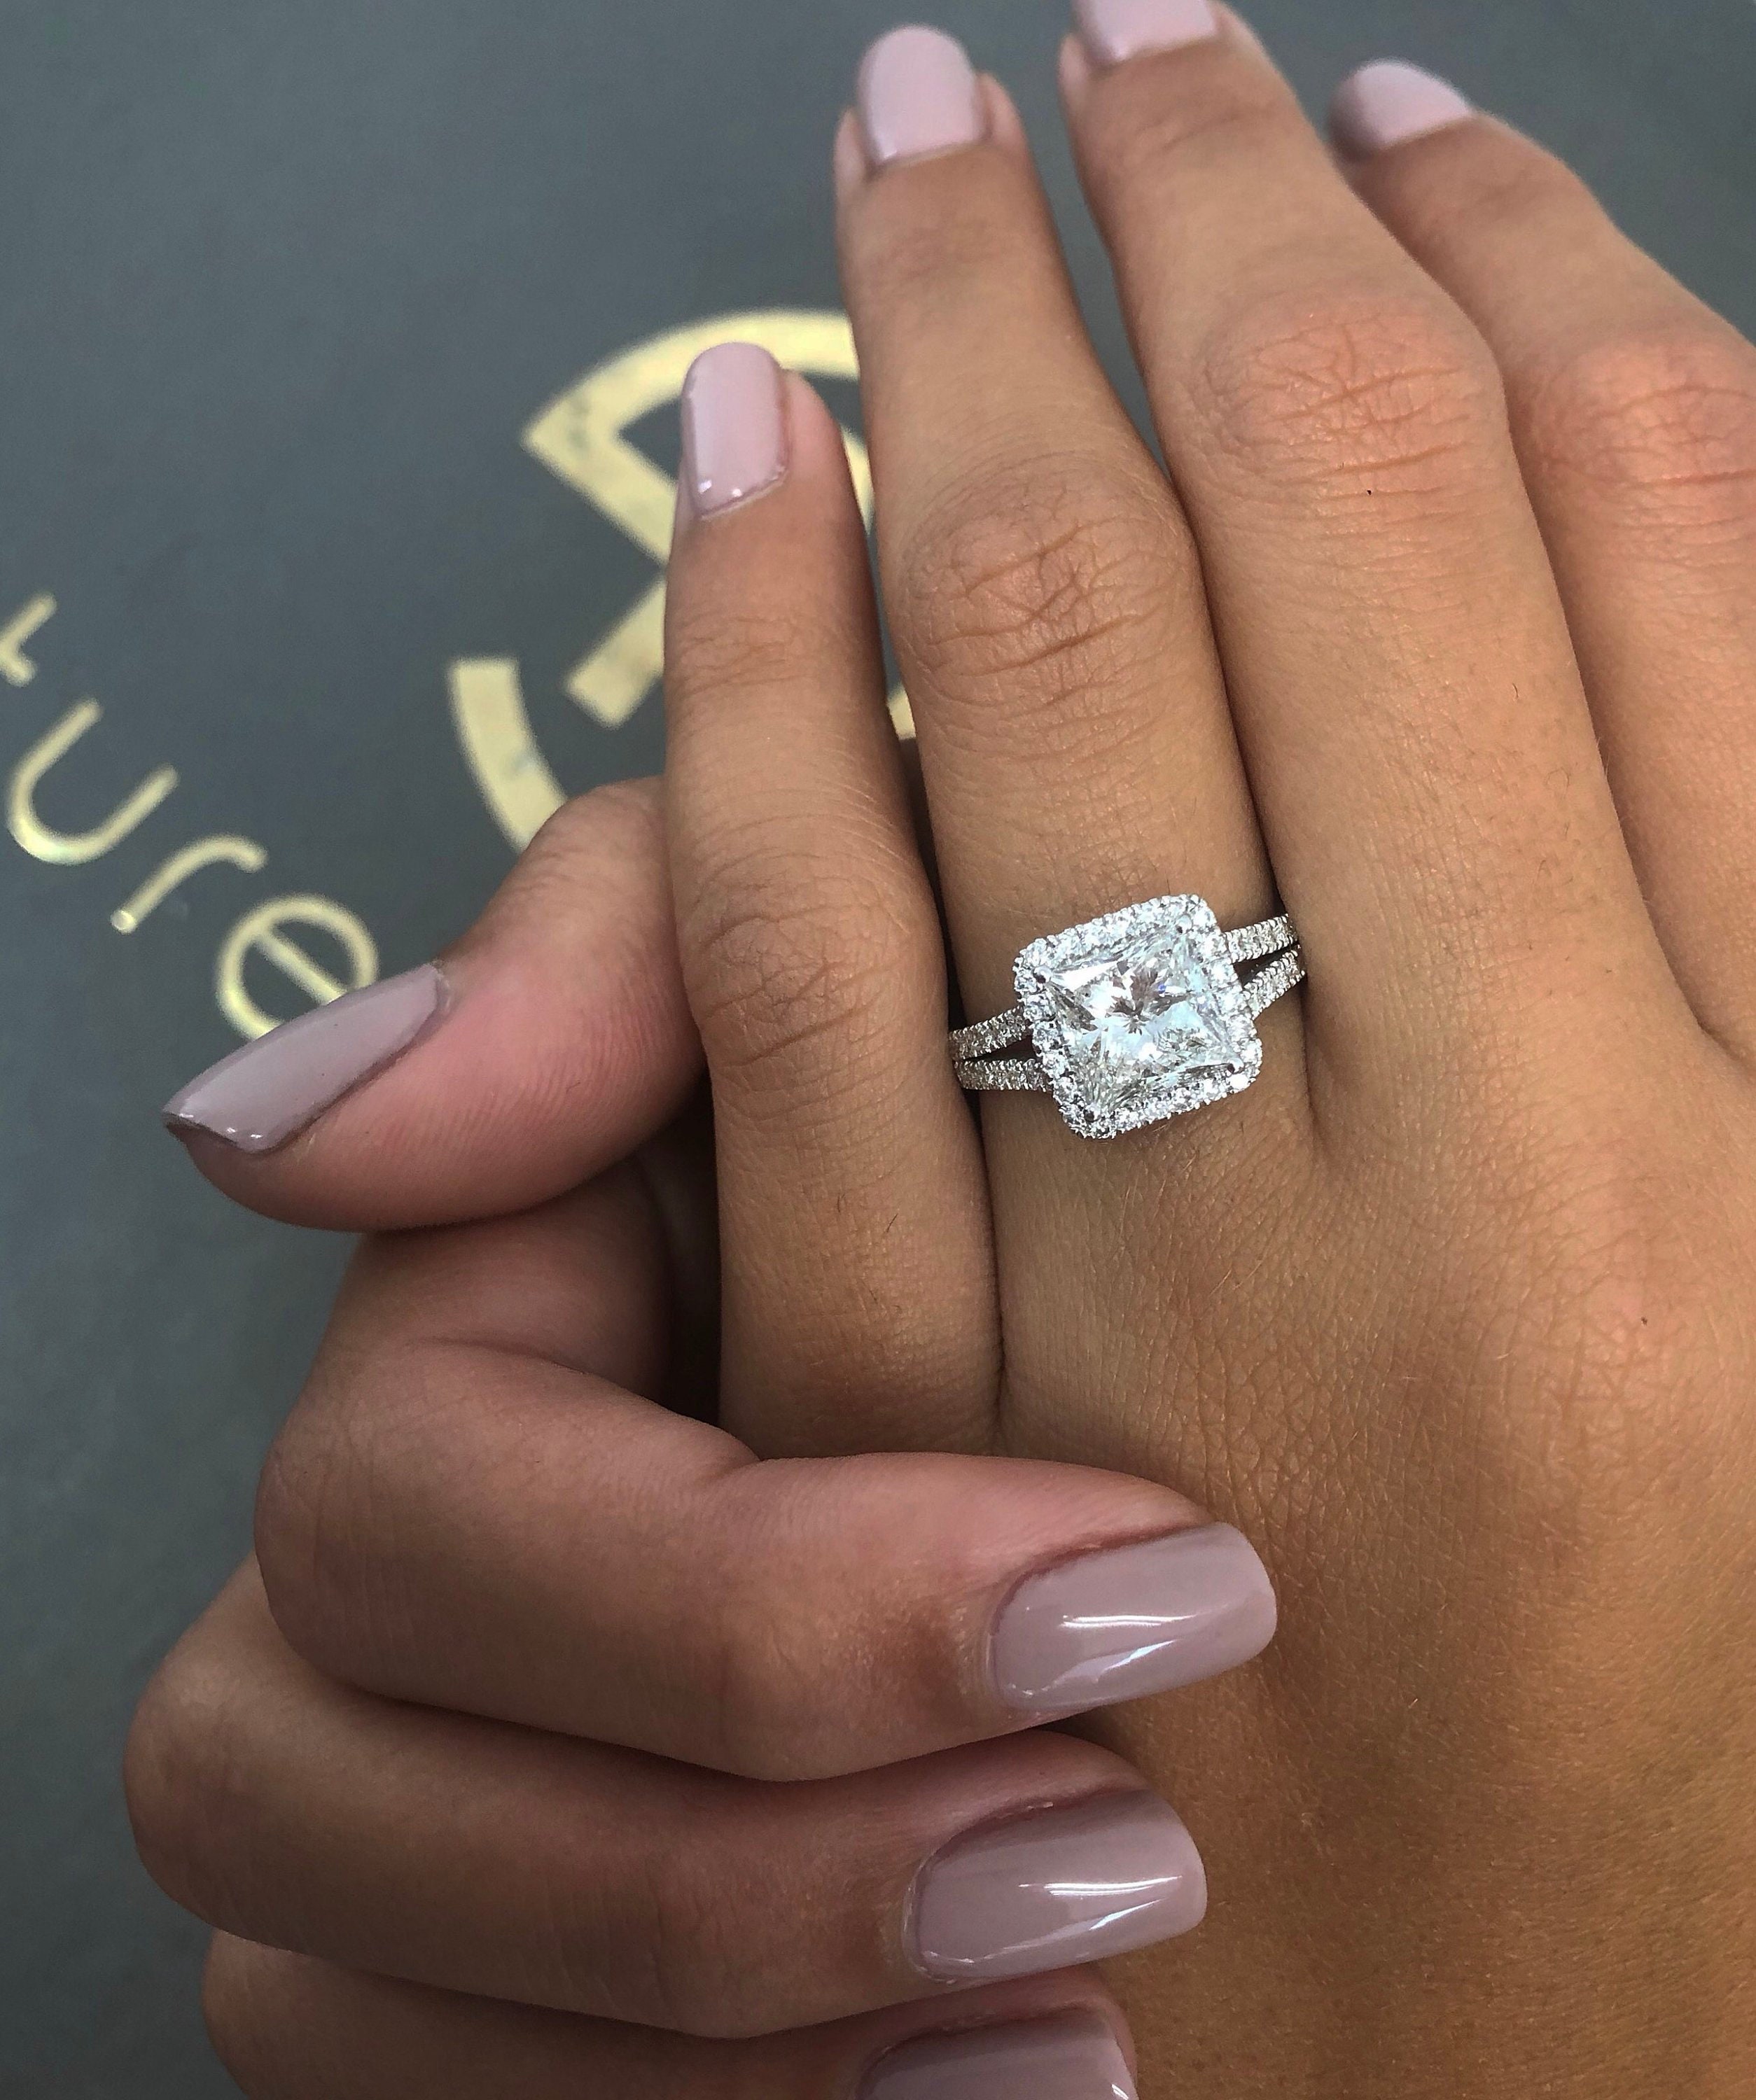 Details about   Large Diamond Engagement Ring 2.50 Ct Princess Cut Diamond 14K White Gold Over 